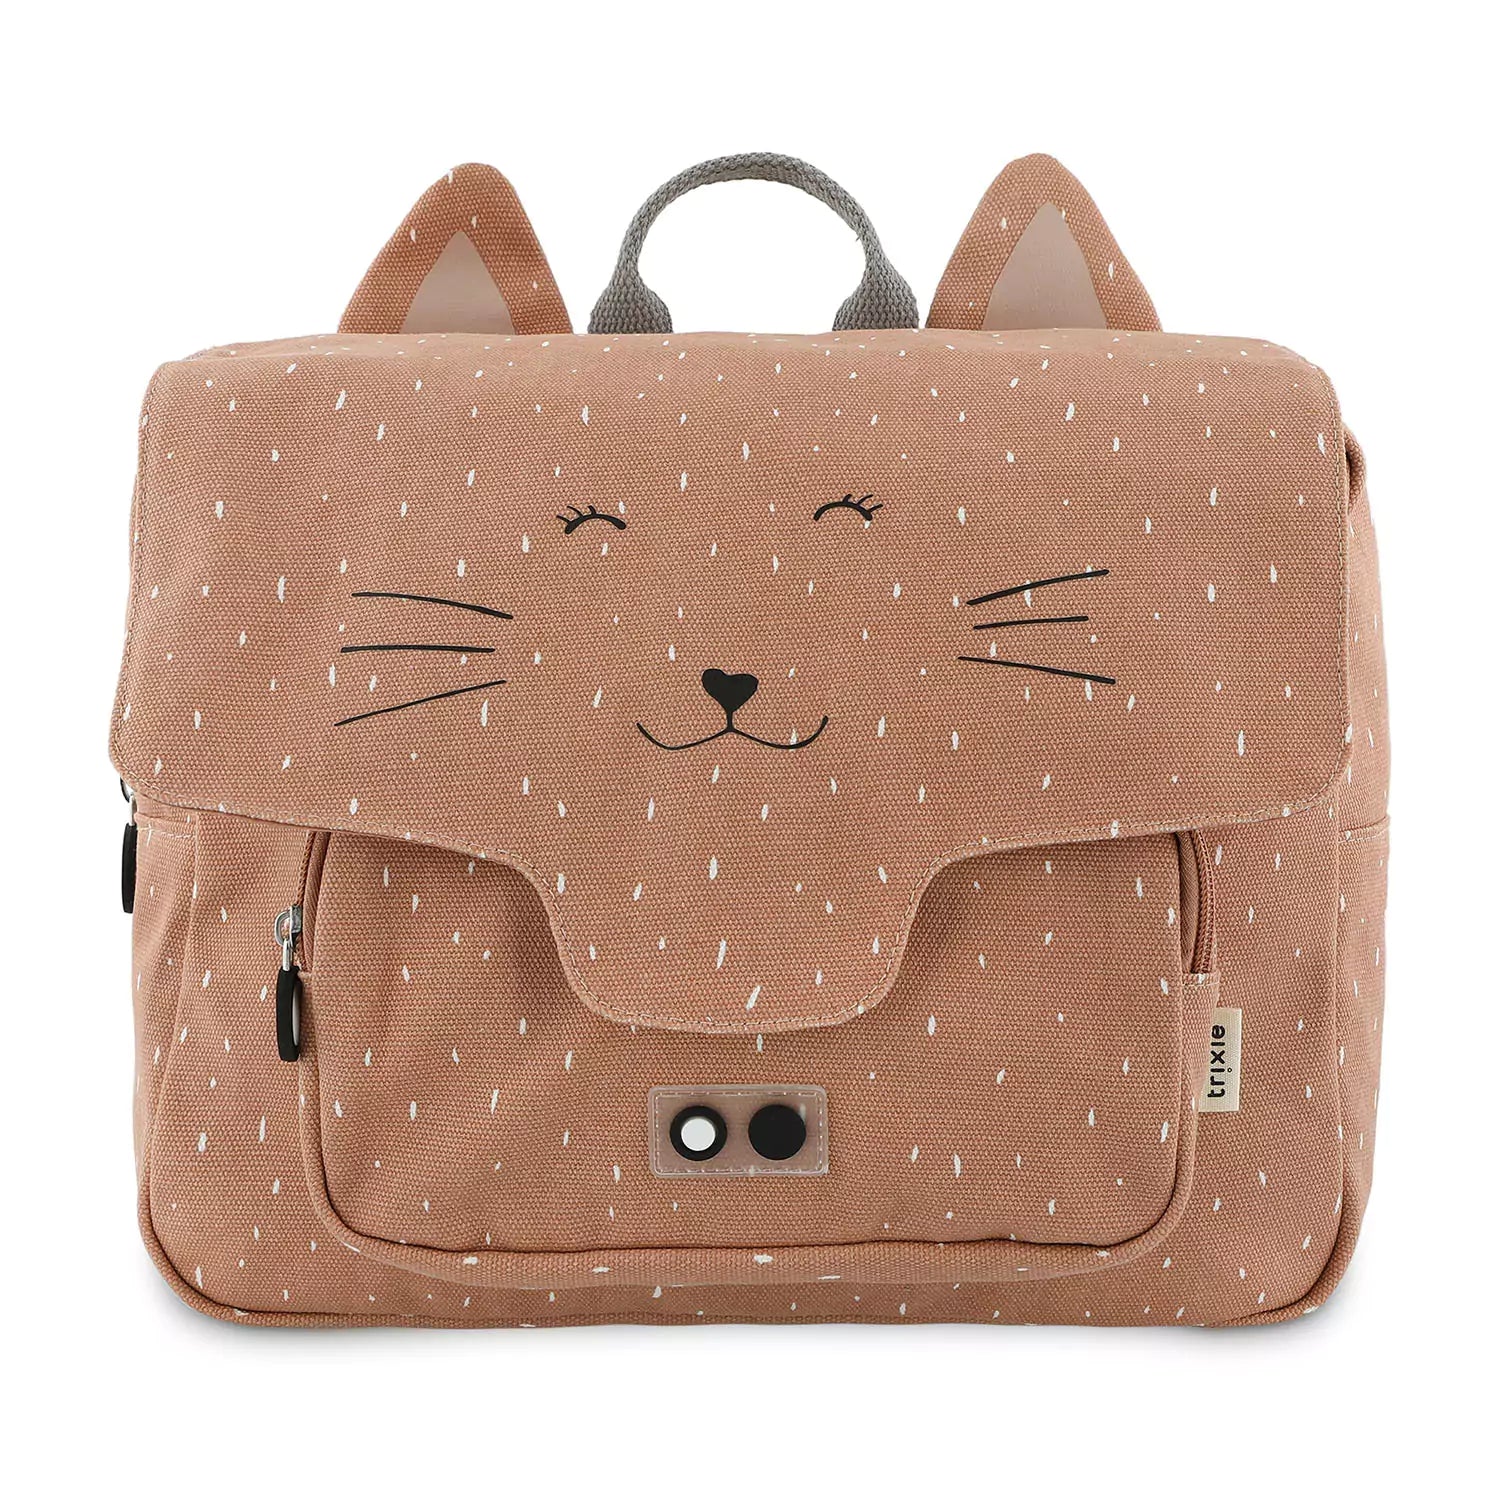 An image of Buy Mrs. Cat Satchel – Kids' Backpack for Adventures